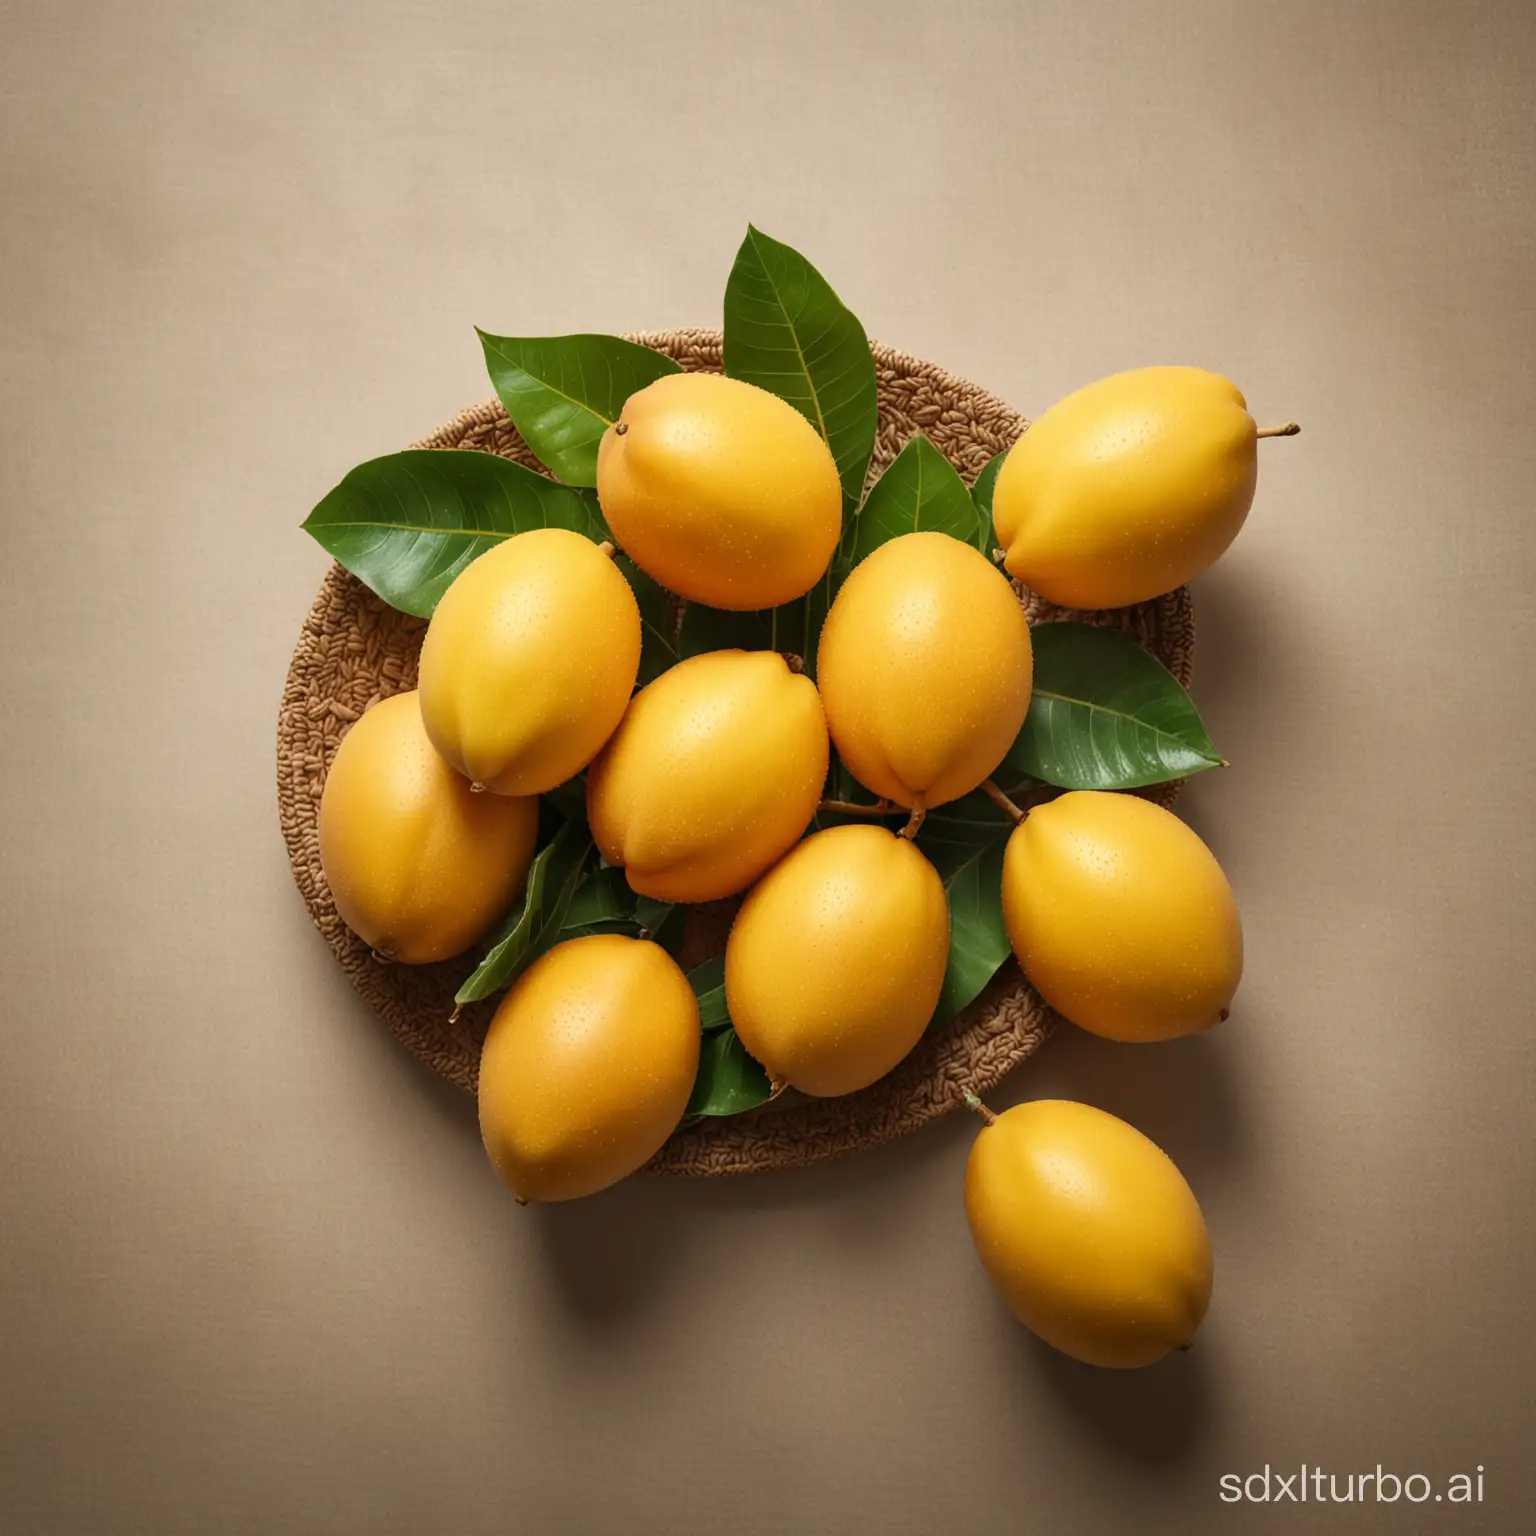 Give me an image of mangoes for business photoshoot .

